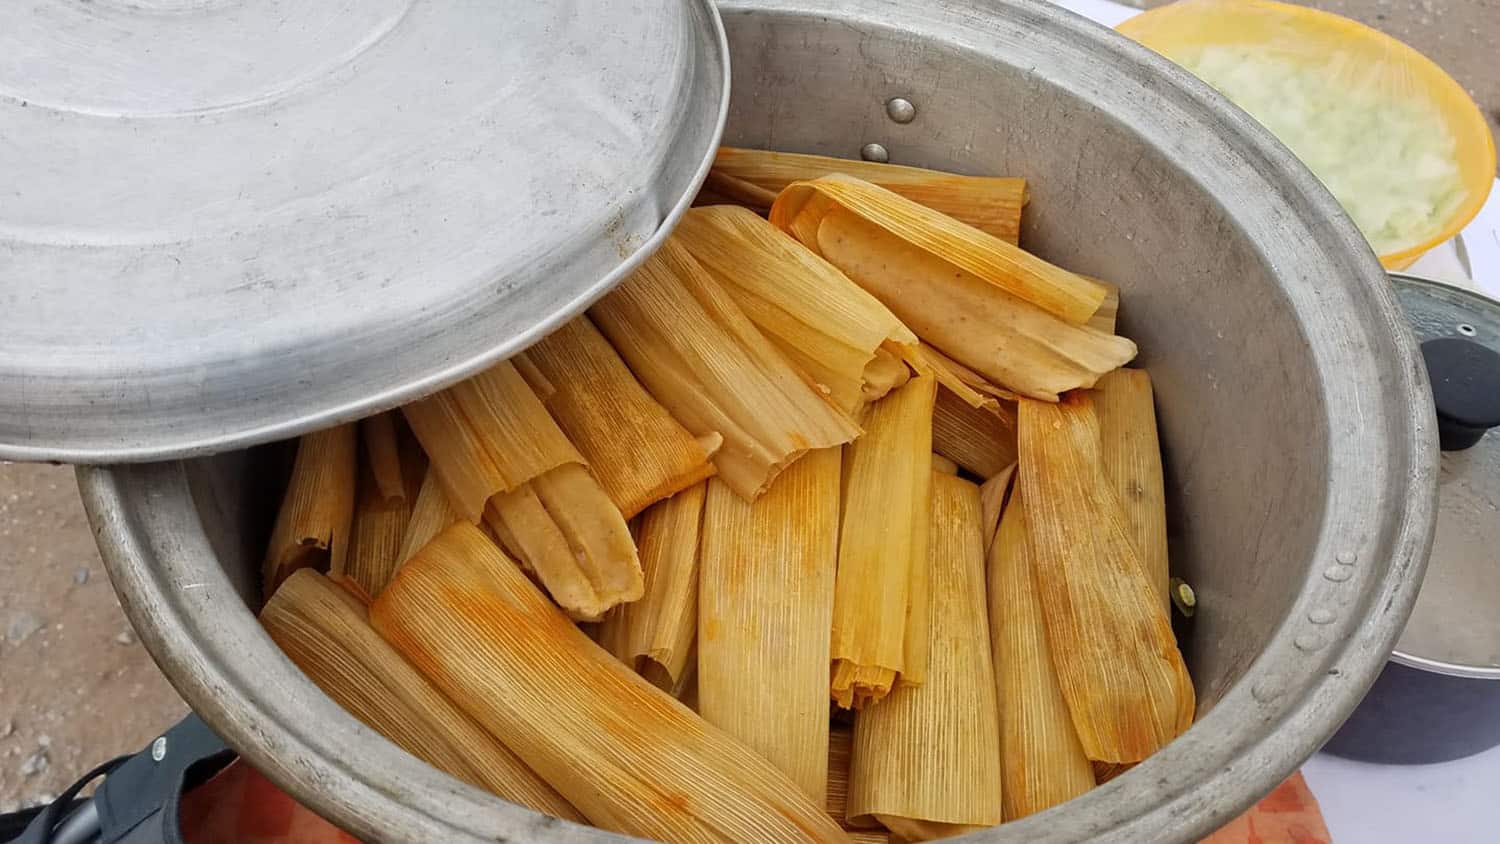 Don’t Make Your Loved Ones Complain: Holiday Food Safety Tips for Tamales